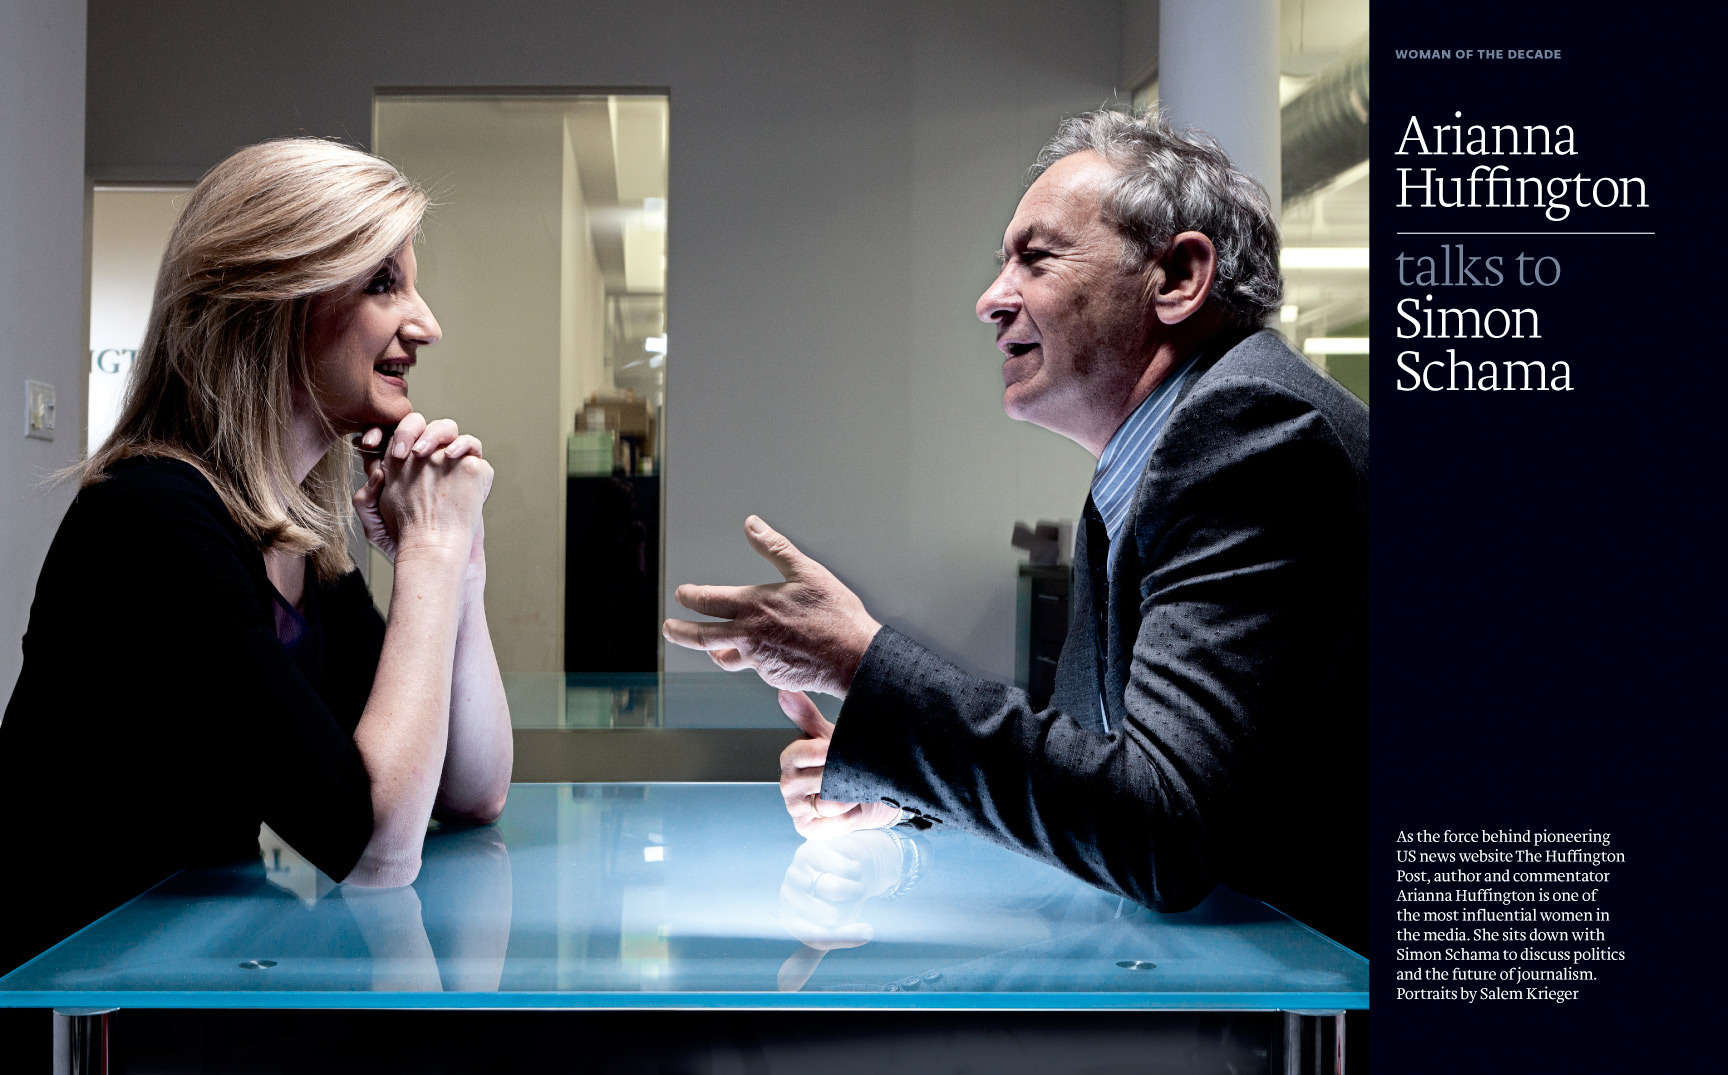 Arianna Huffington in conversation with art historian Simon Schama for FT Weekend Magazine, London-England : Portraits : New York City based photographer and video specializing in portrait corporate portraits, video, editorial stories for on location and architectural photography